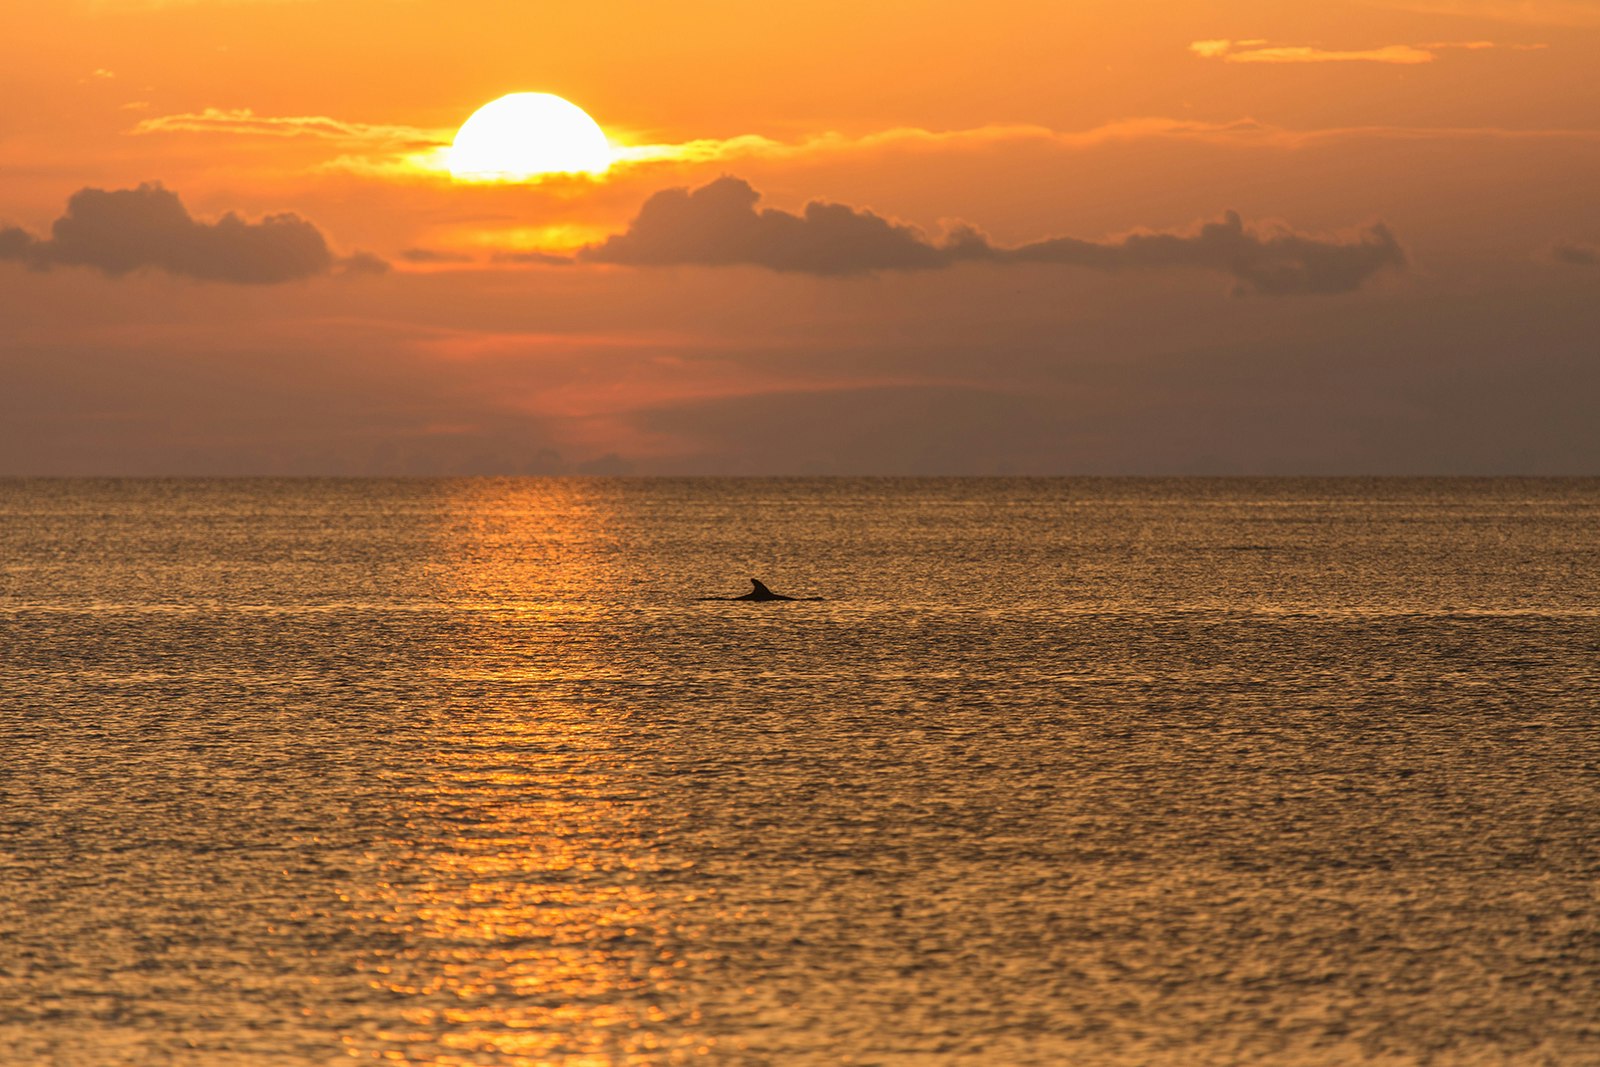 dolphin fin breaks the waves at sunset on the Gulf of Mexico